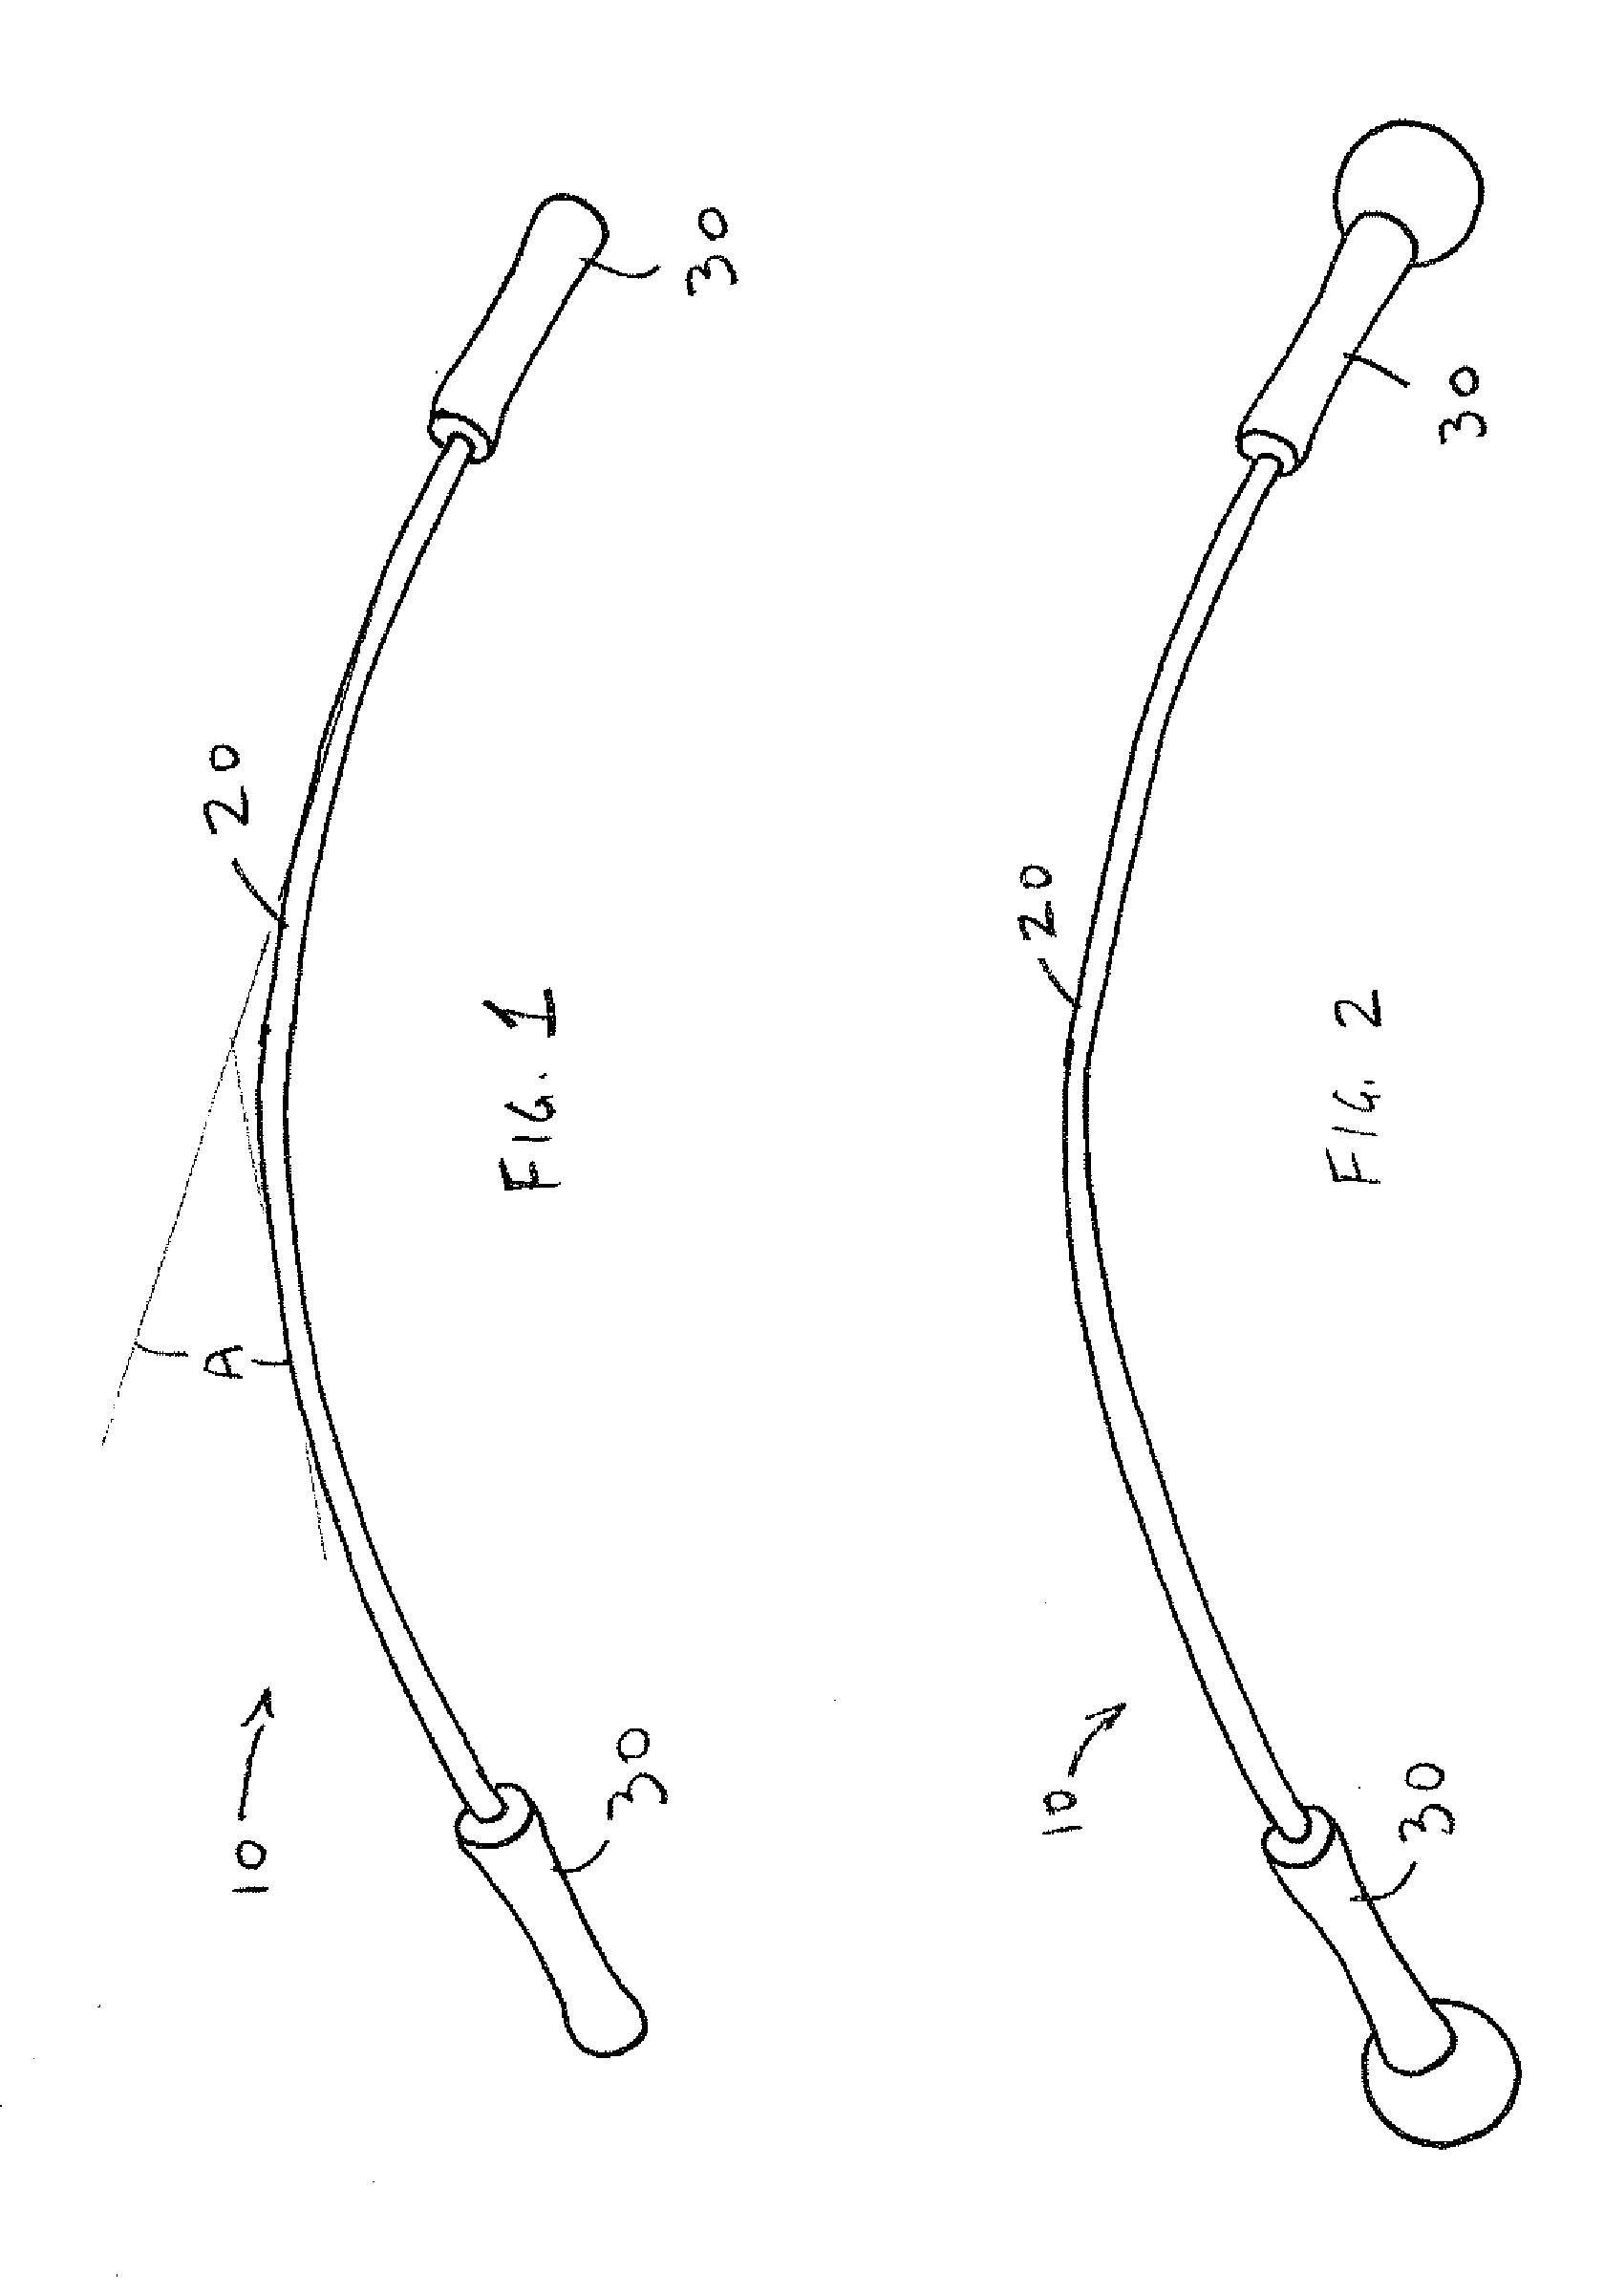 Exercise Device and System, and Methods of Using Same